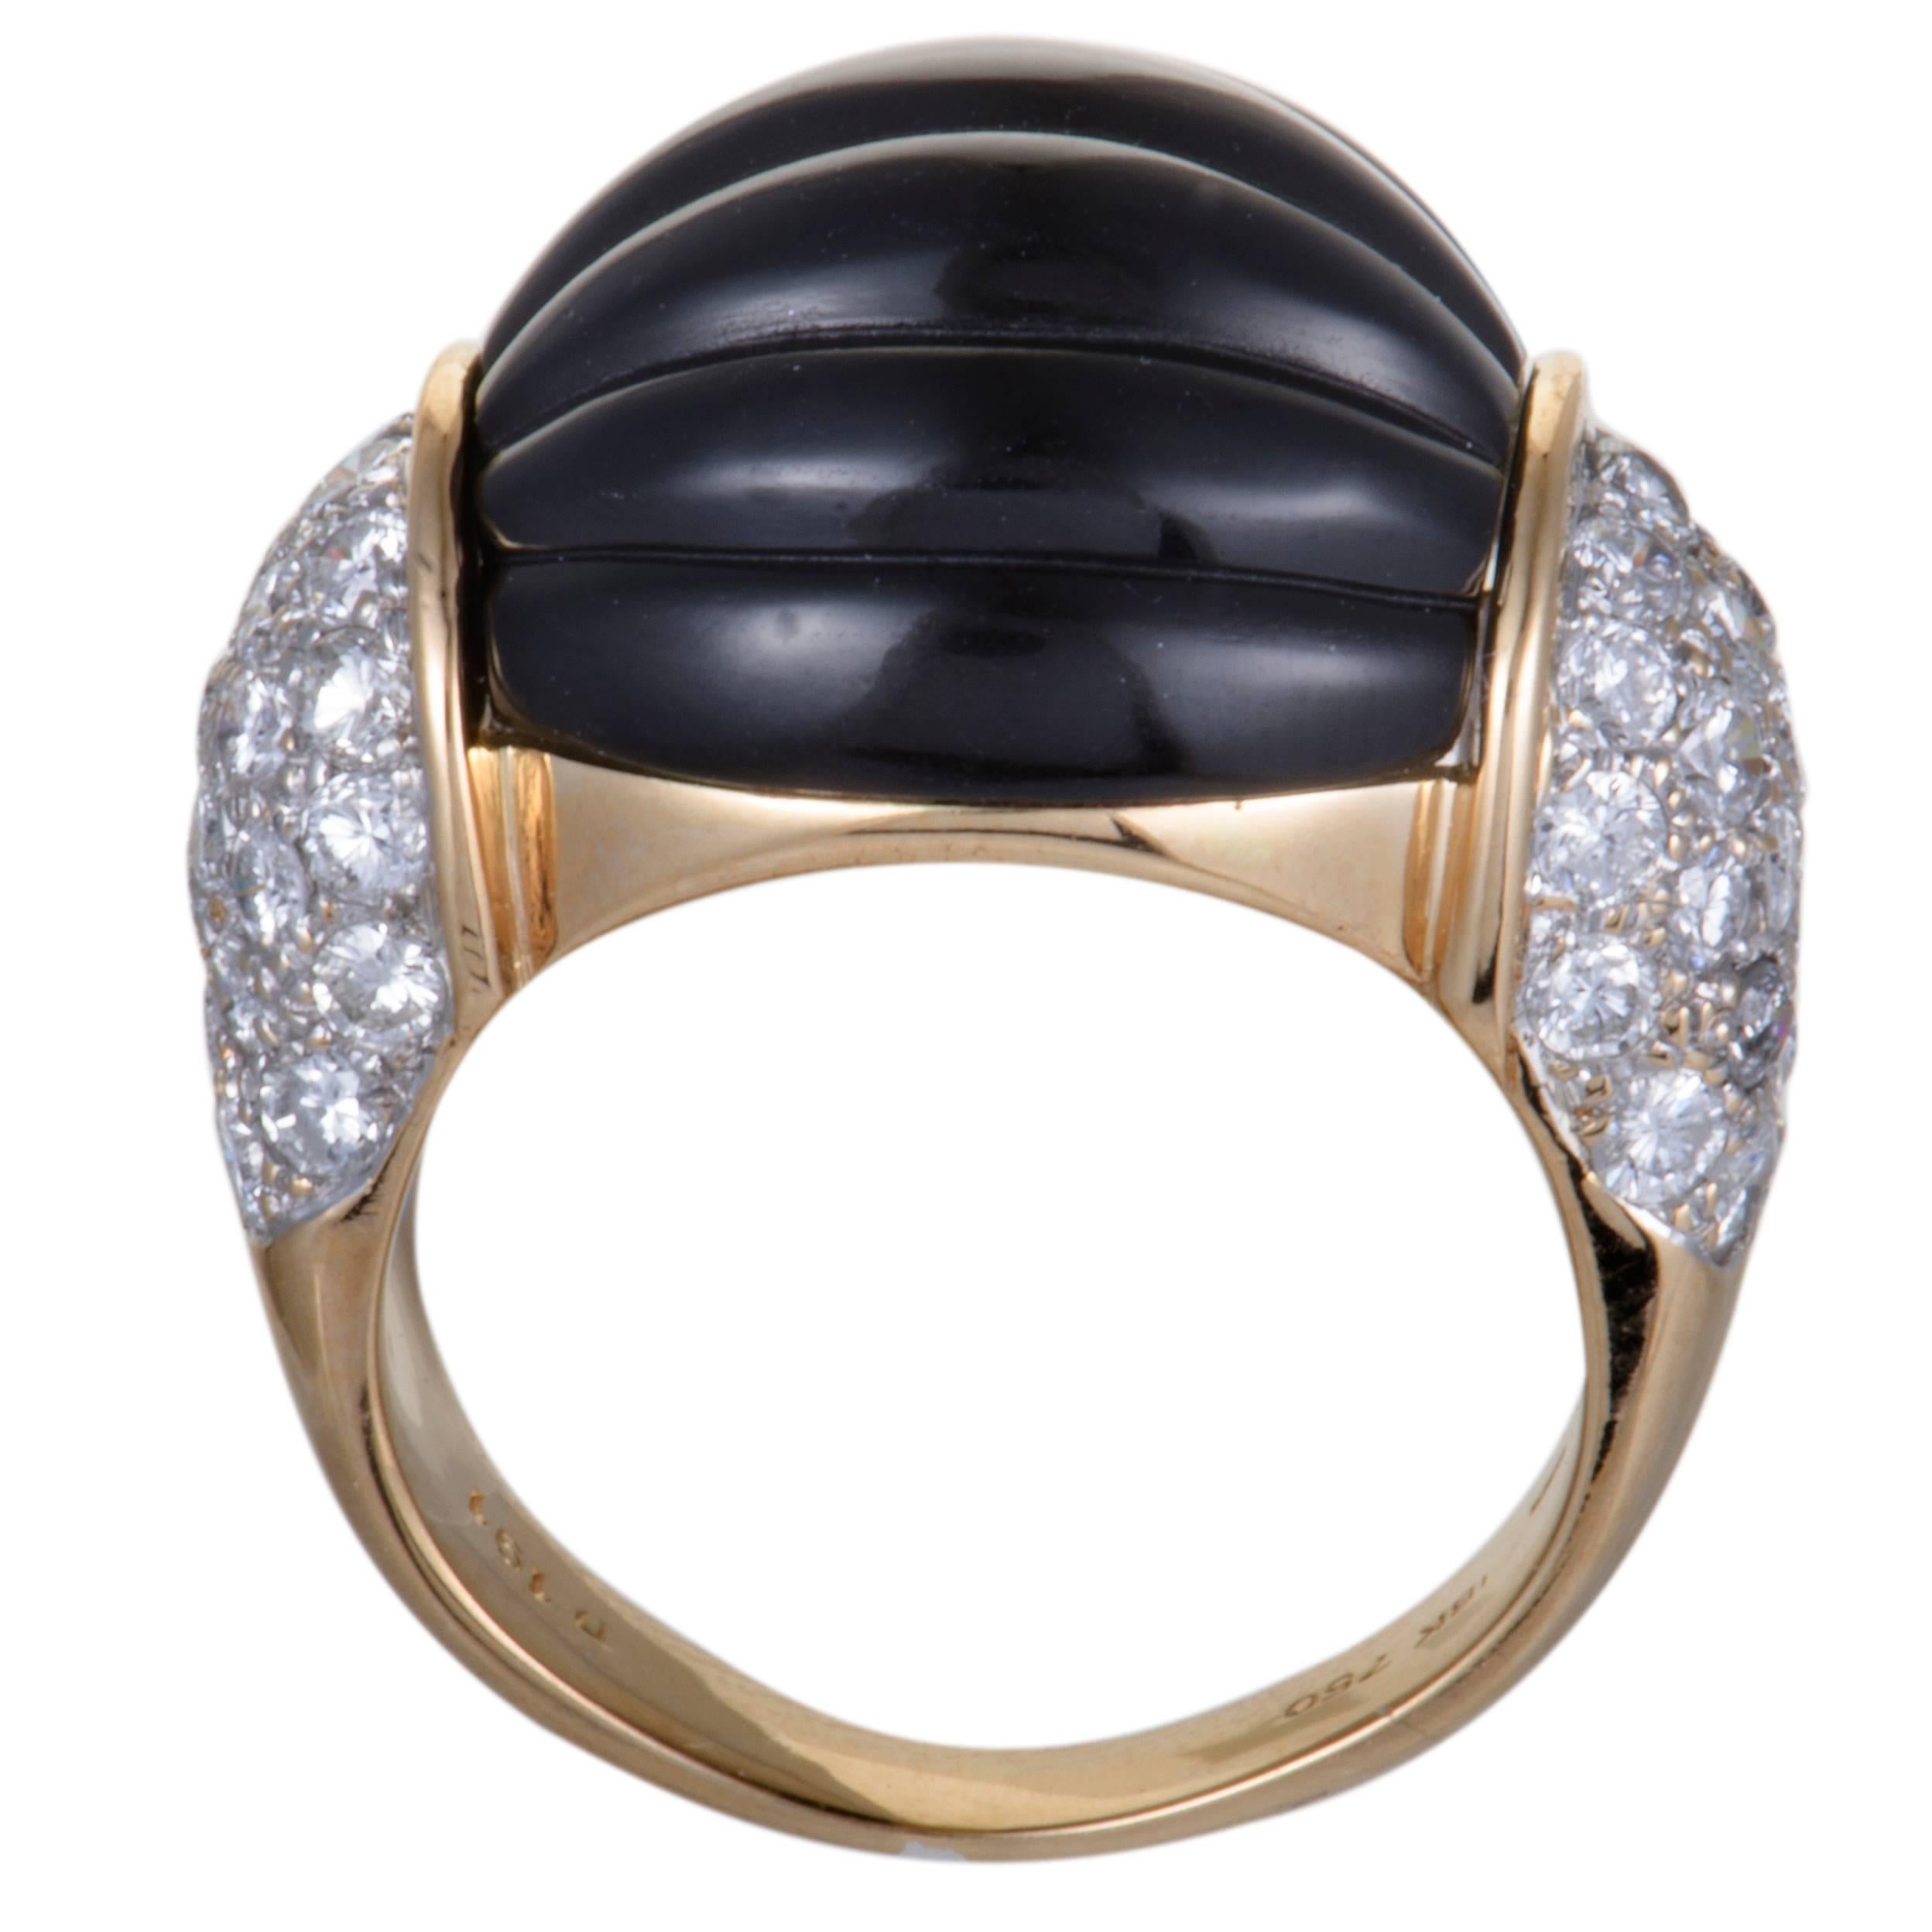 Beautifully crafted in shimmering 18K yellow gold, this gorgeous ring is an exceptionally attractive item. The exemplary ring is embellished in 1.19ct of spectacular dazzling diamonds with a bold black onyx on top that makes the piece absolutely